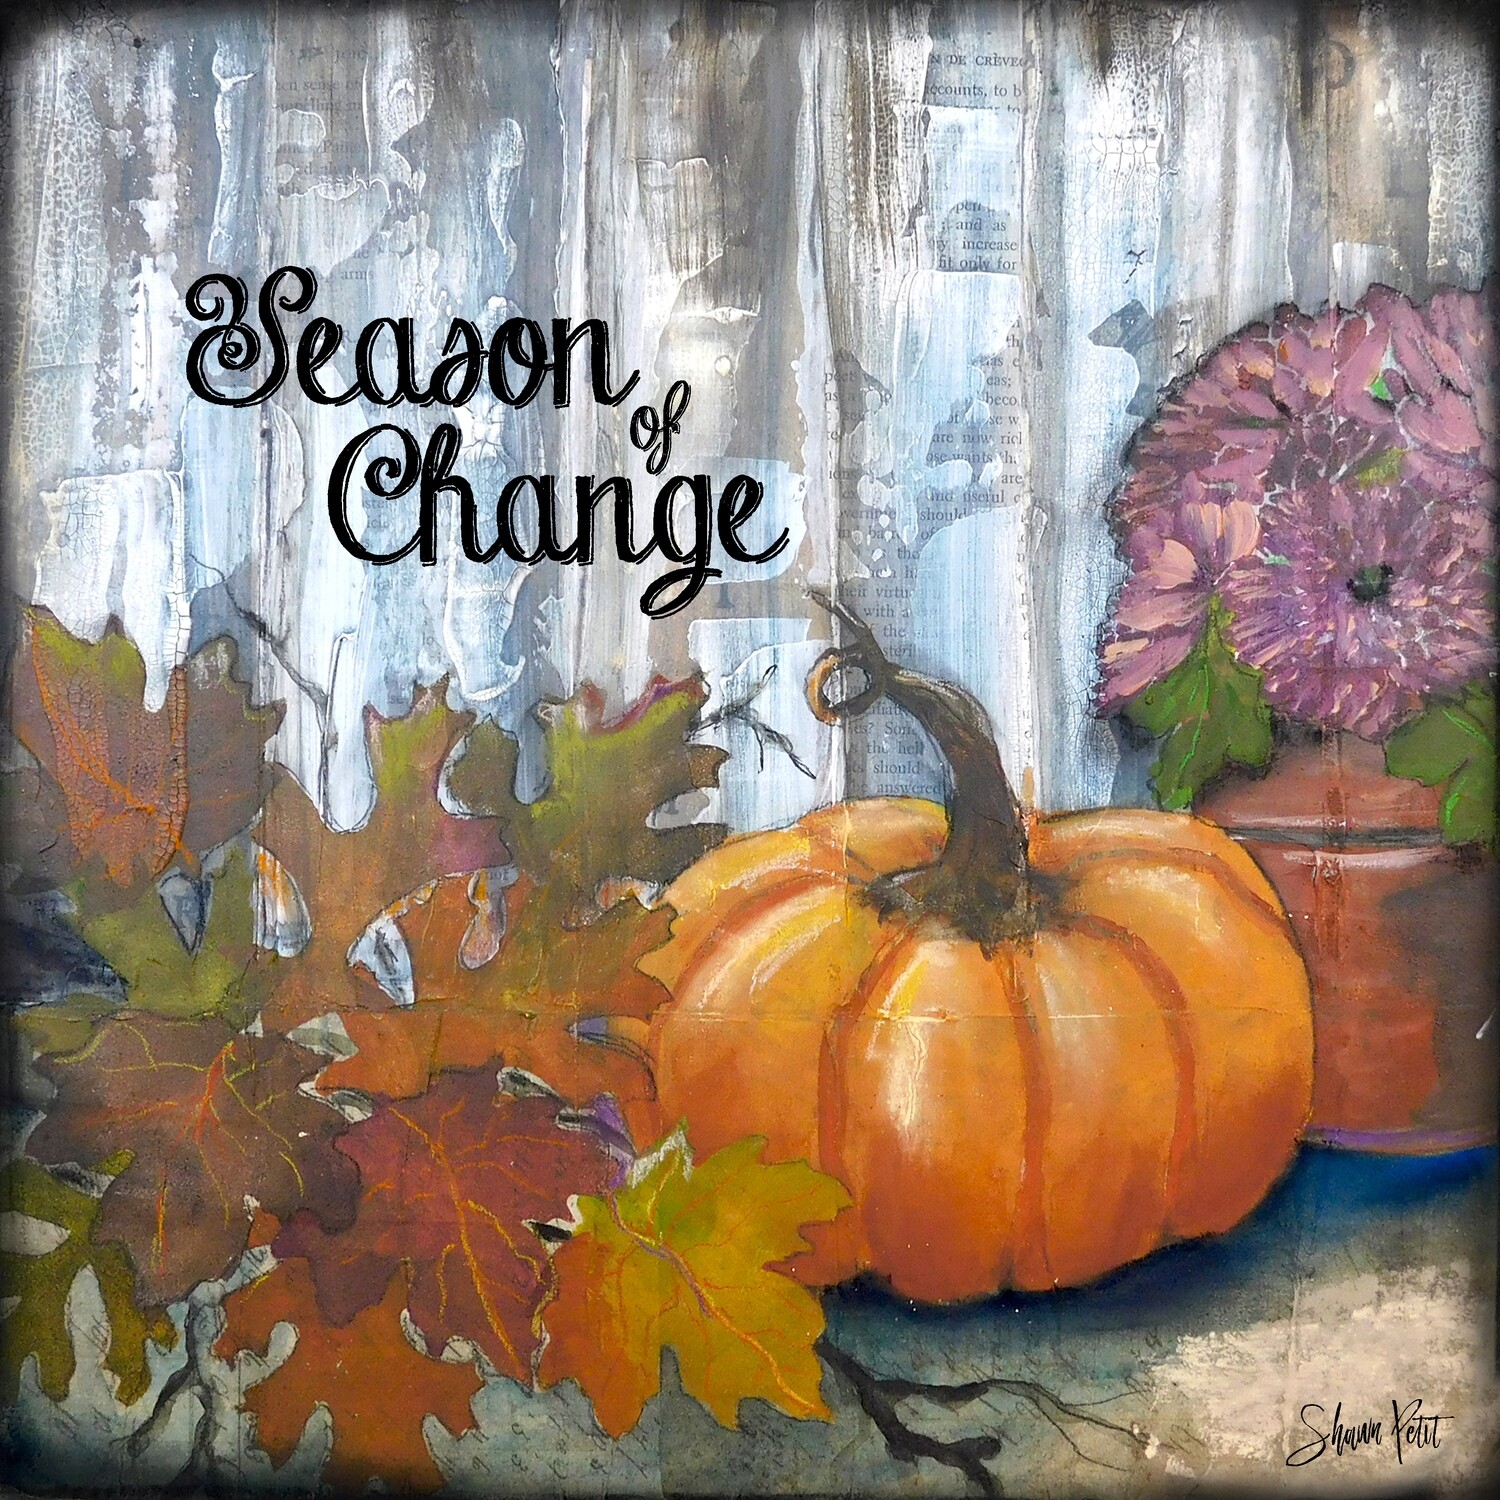 "Season of change" with words Print on Wood and Print to be Framed